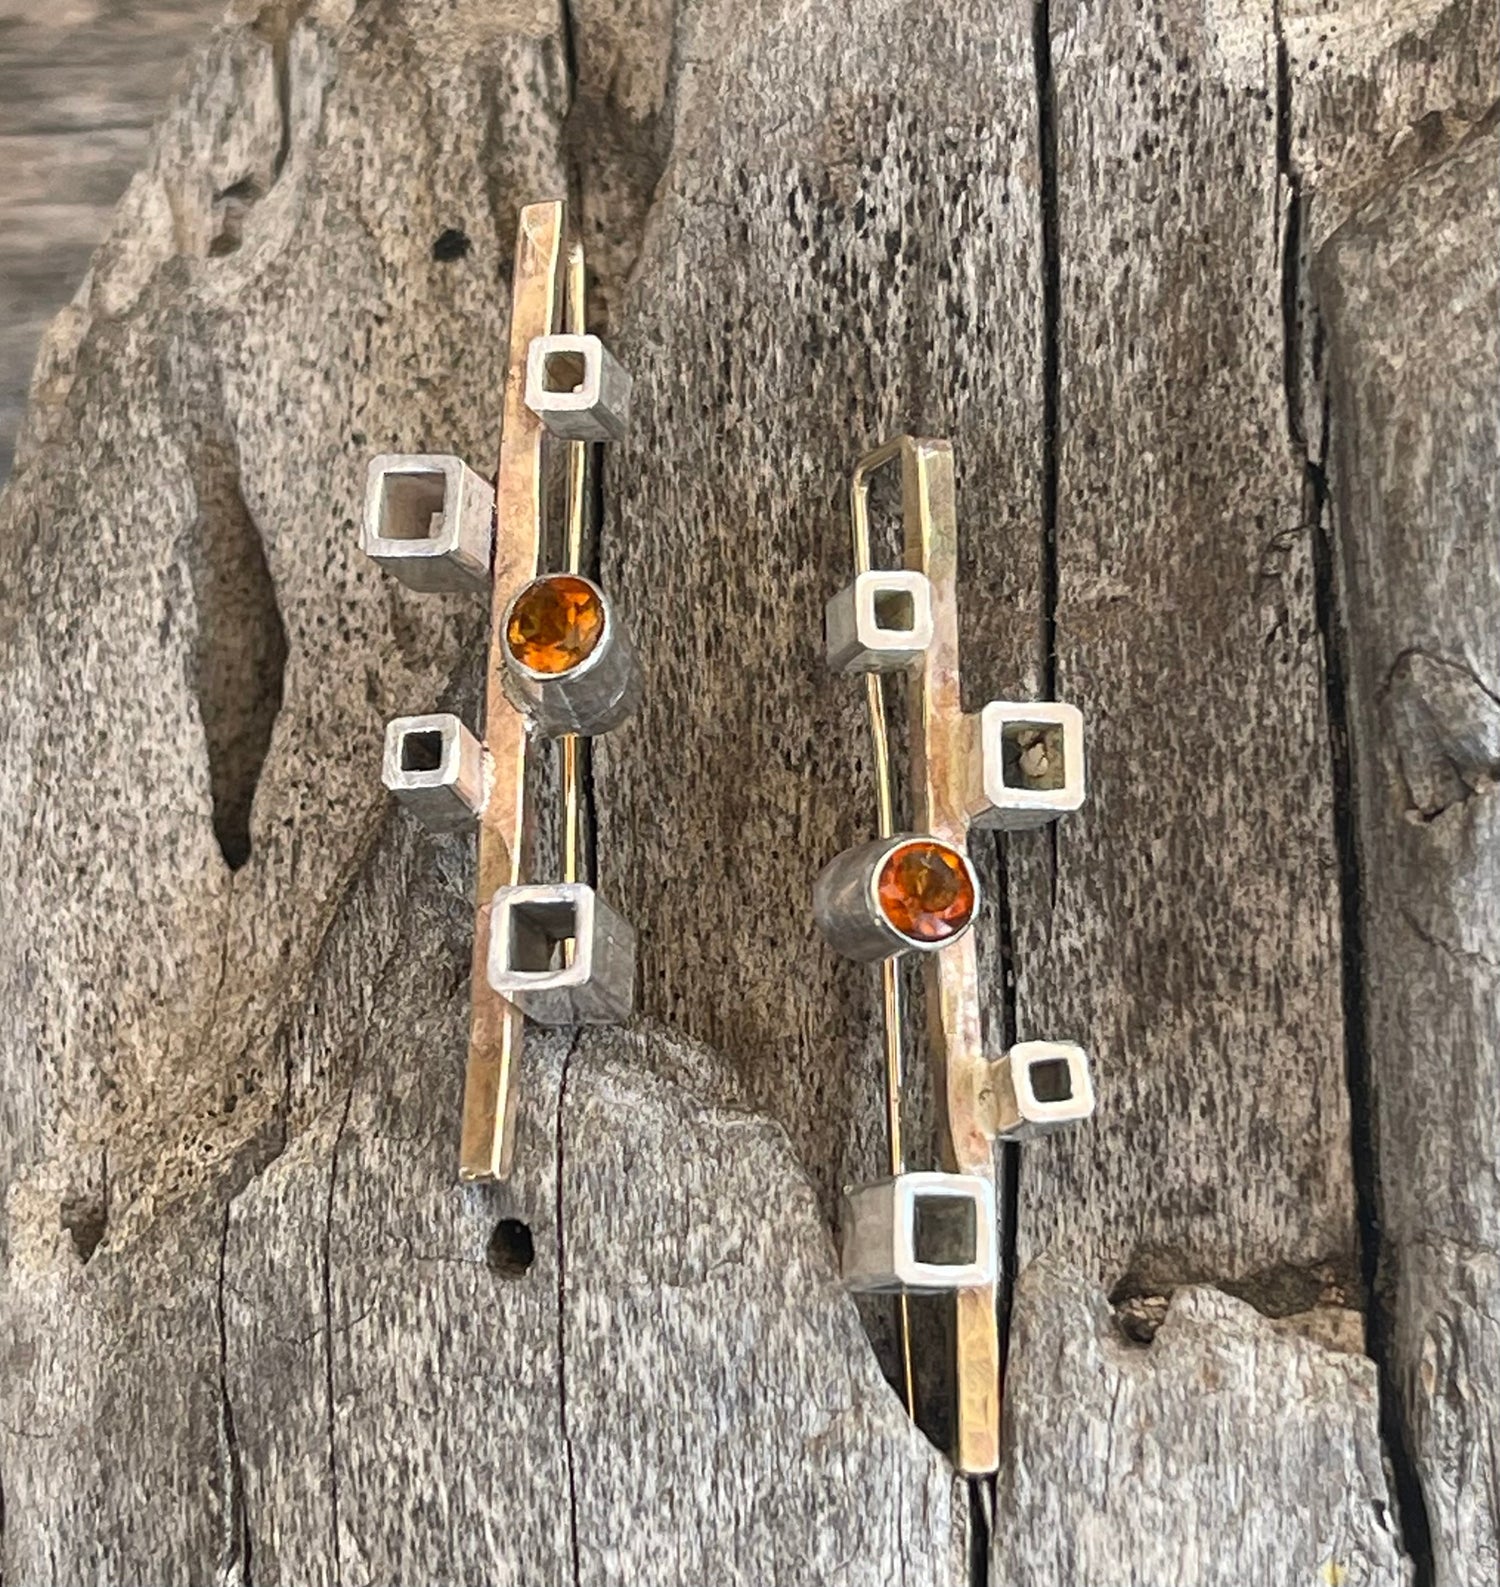 14K Gold Fill Earrings with Silver Tube Set Citrine and Silver Squares